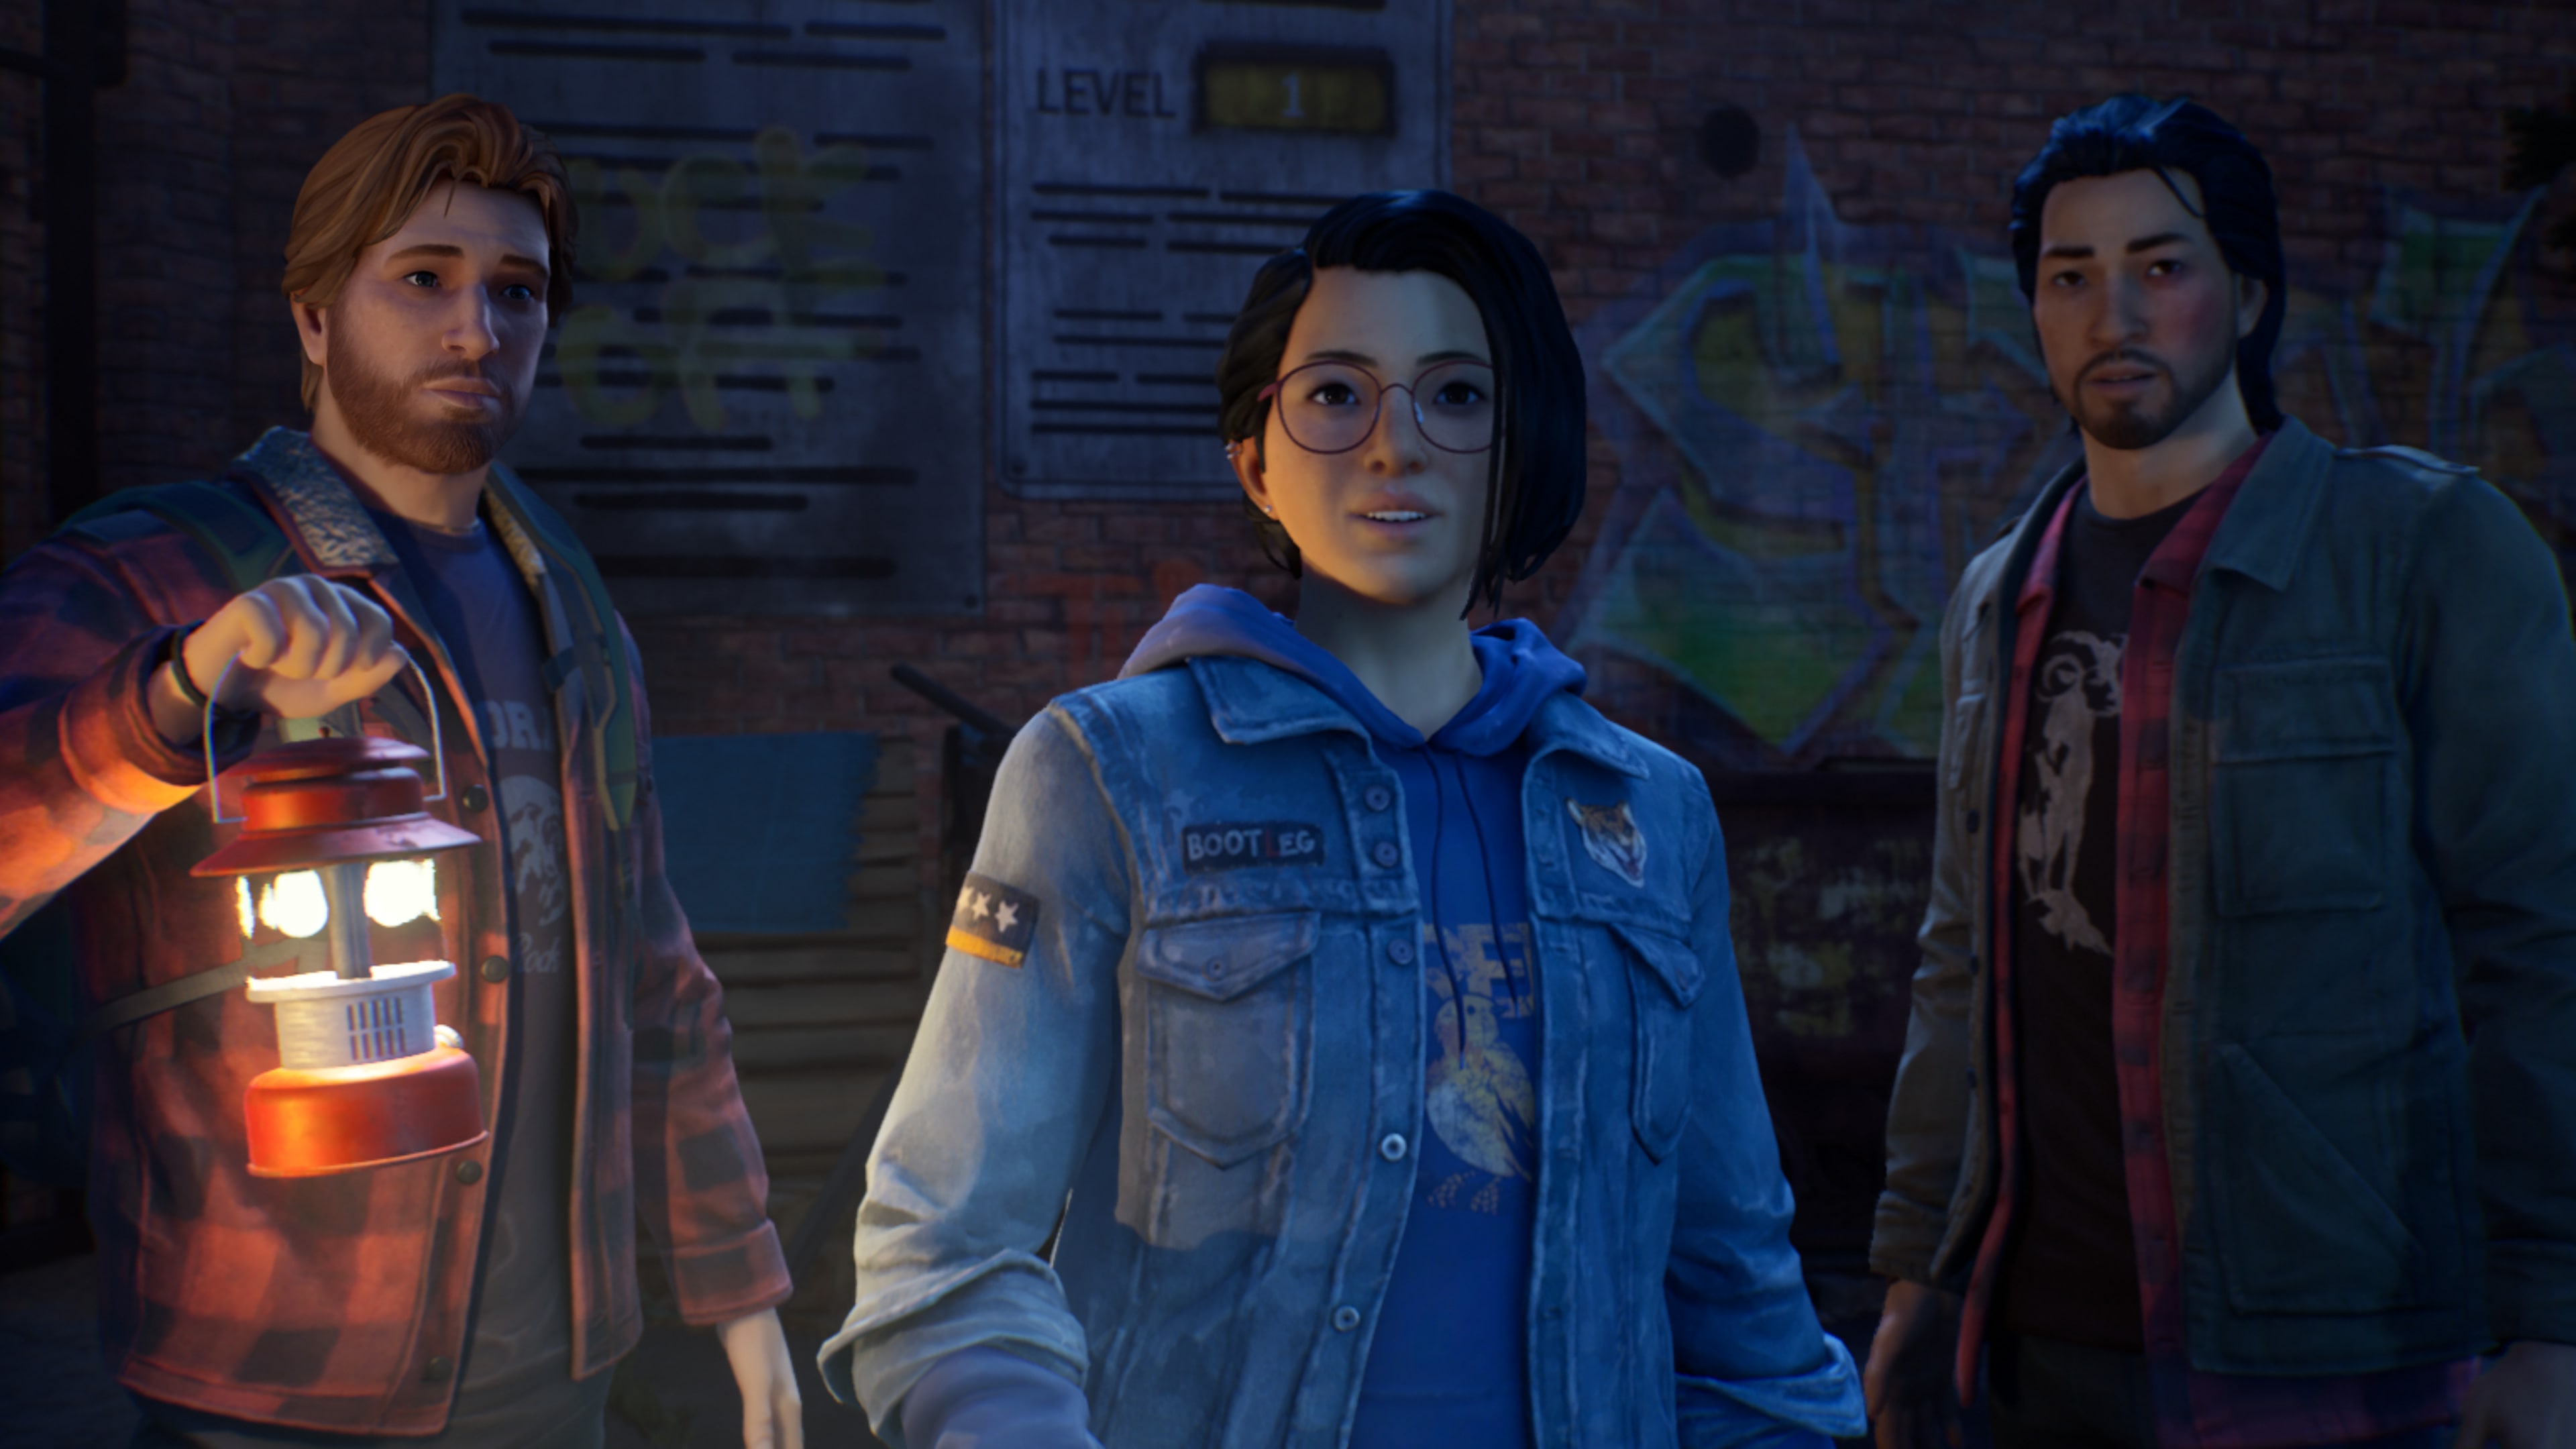 Life Is Strange: True Colors PS4 & PS5 on PS5 PS4 — price history,  screenshots, discounts • USA